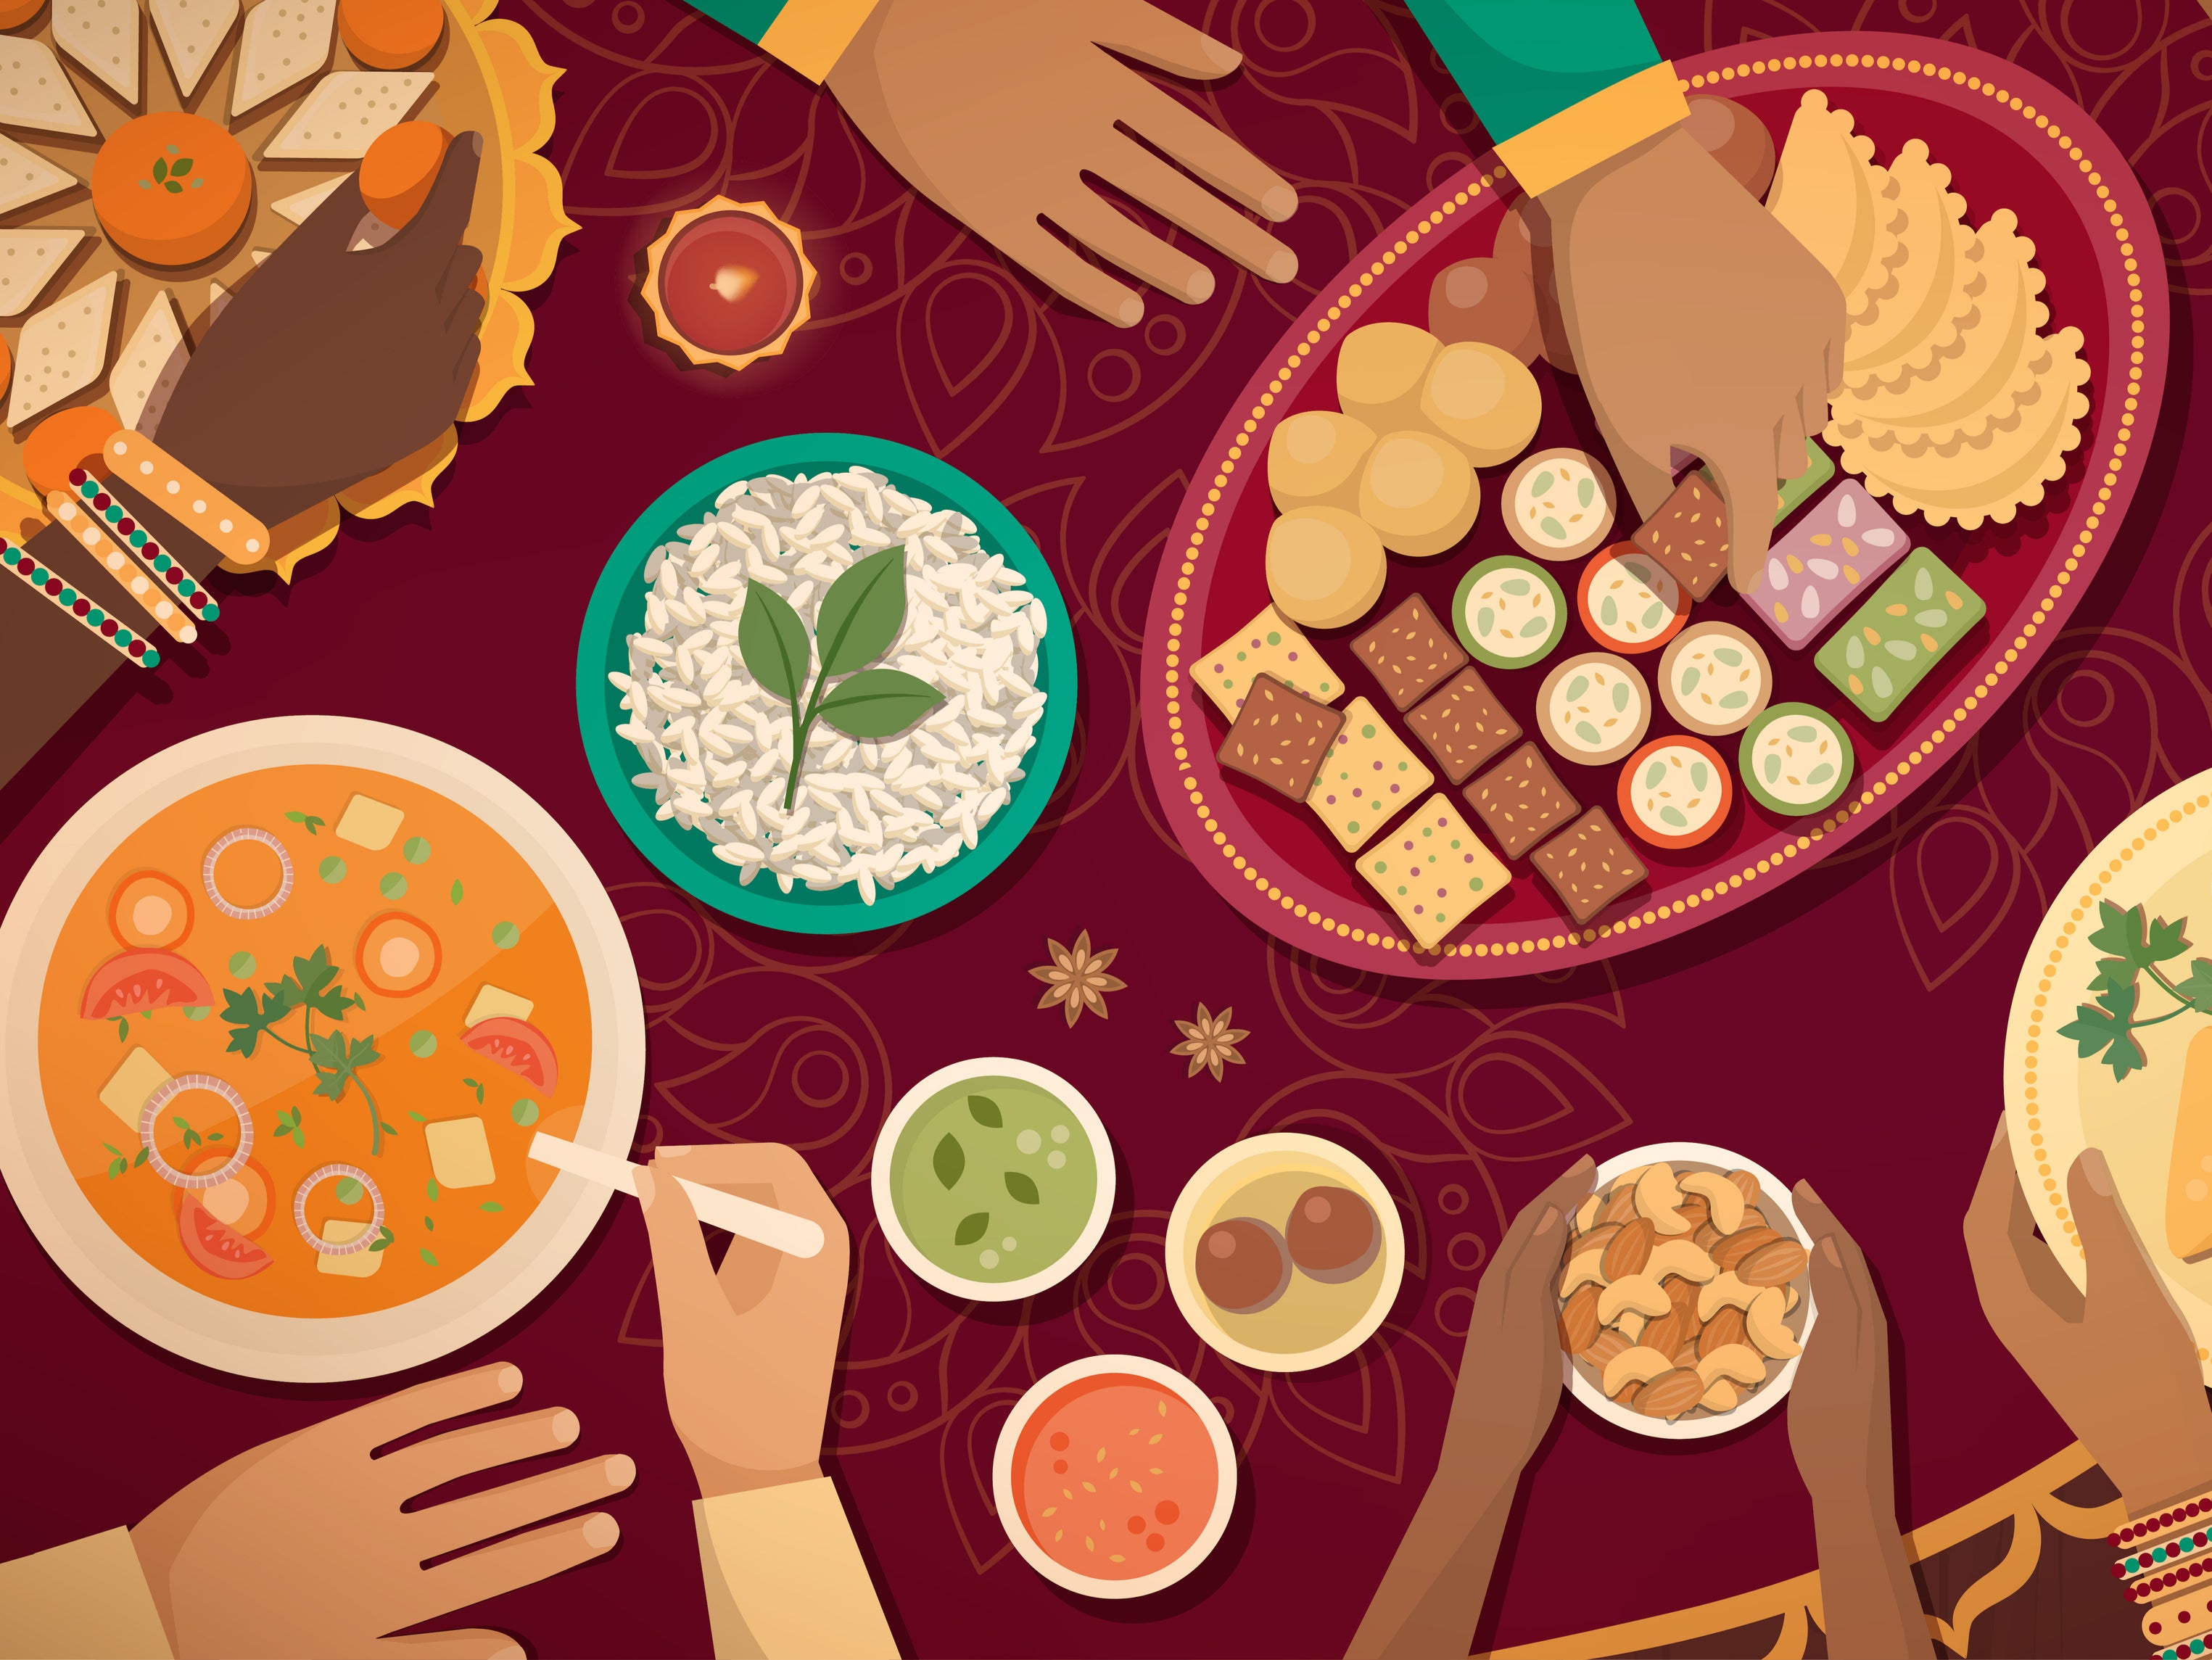 Diwali is all about family, friends and food